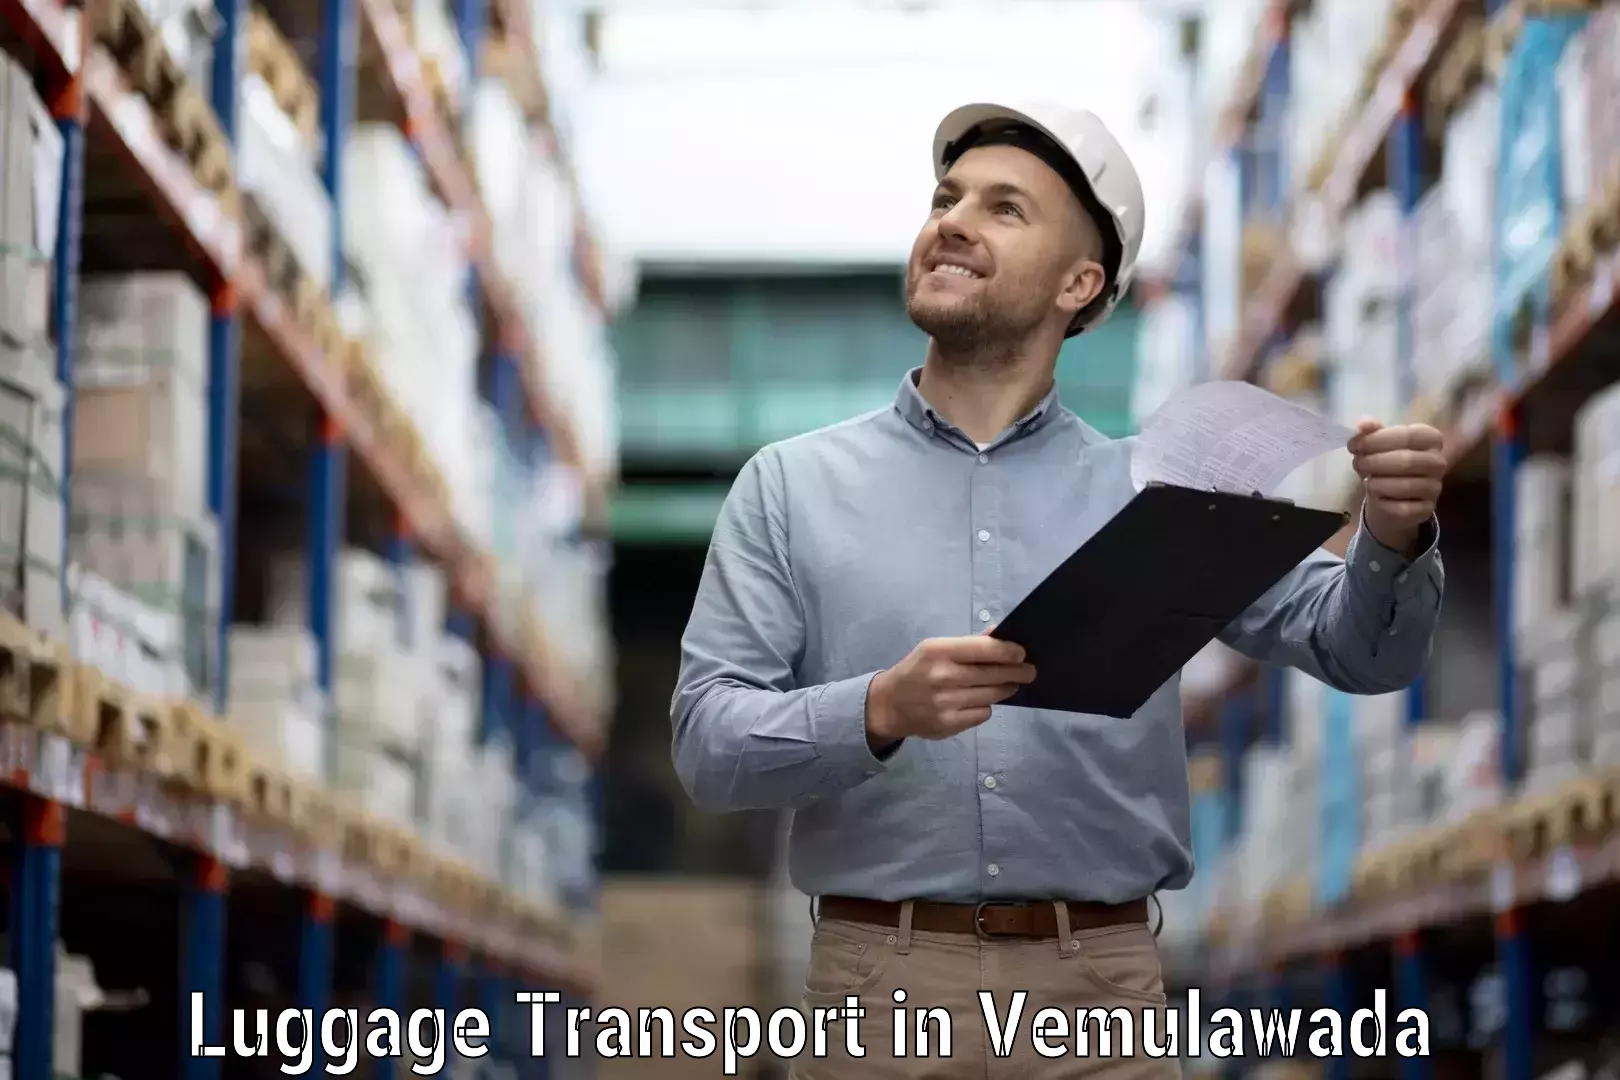 Domestic luggage transport in Vemulawada